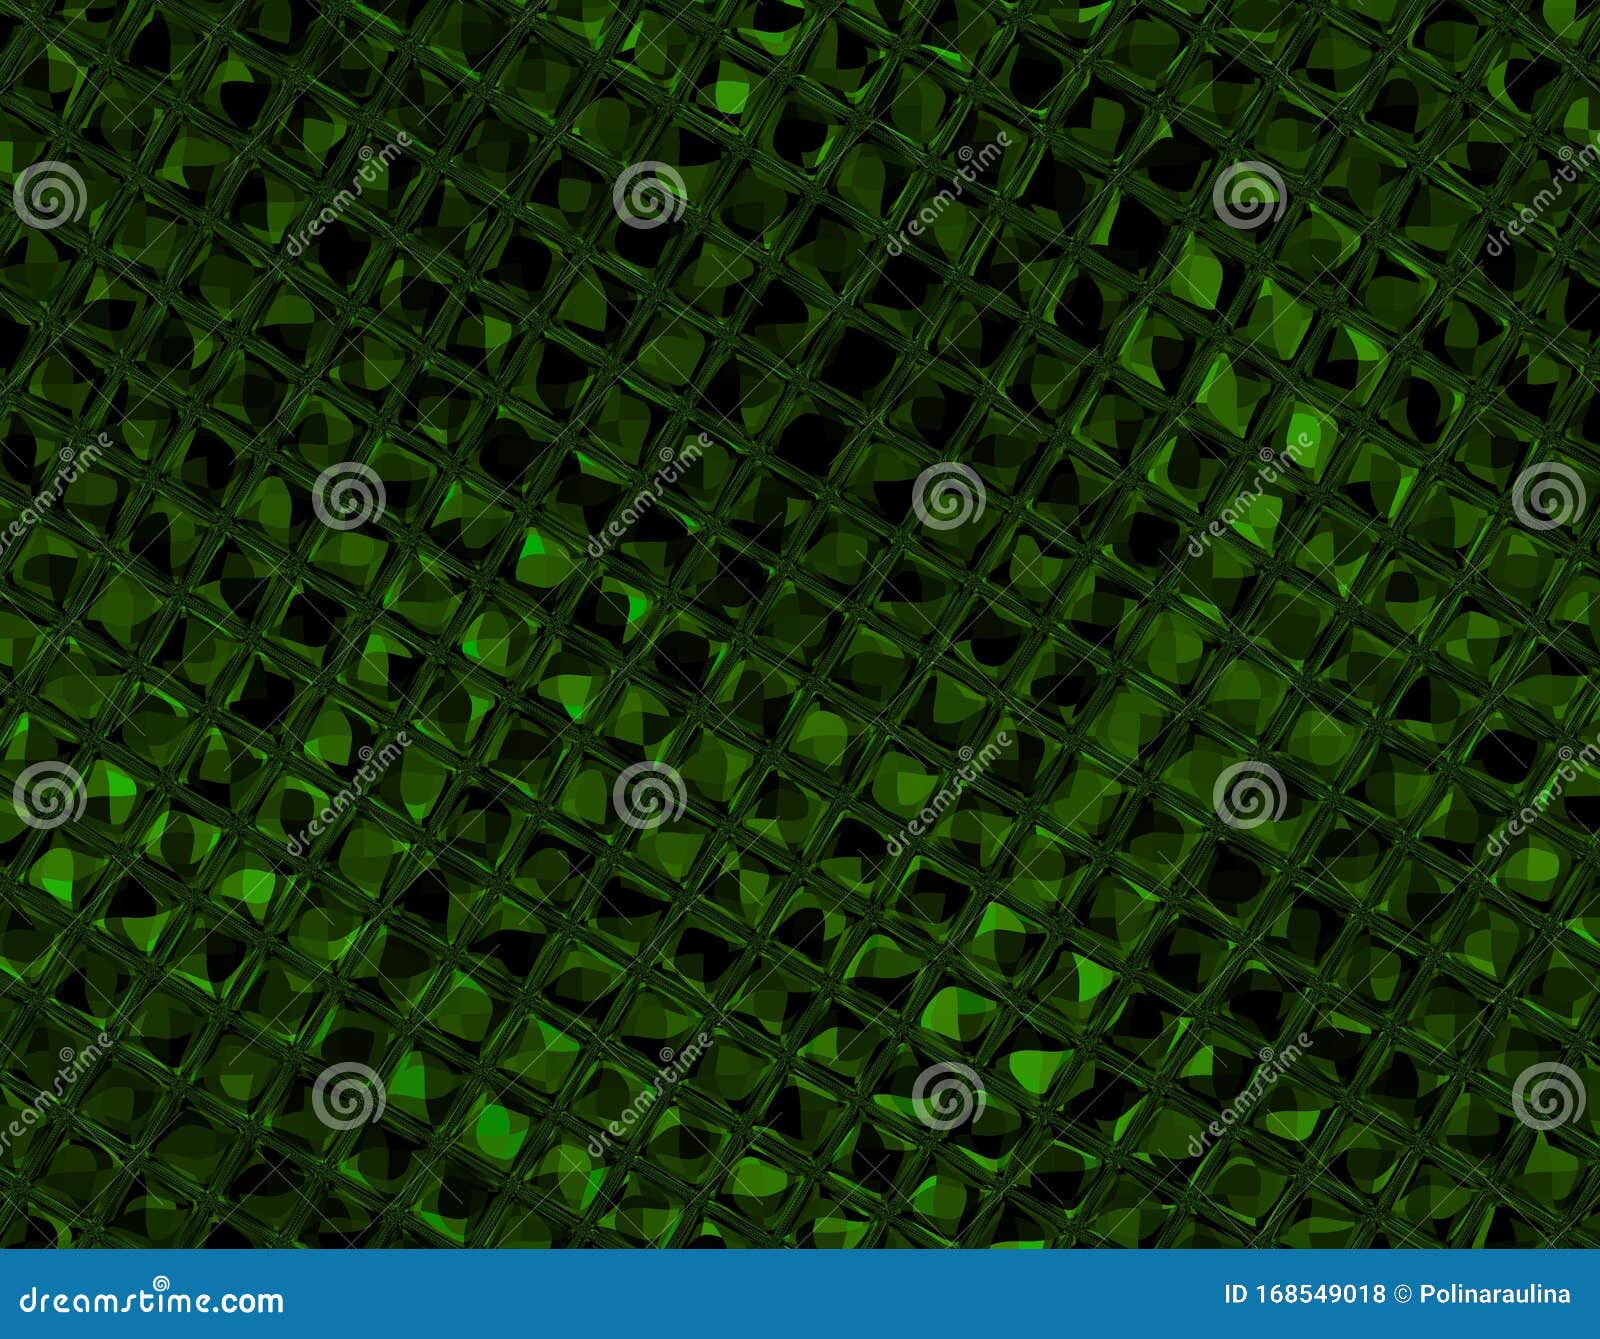 Dragon Skin Green Texture Background. Stock Photo - Image of emerald,  exotic: 168549018